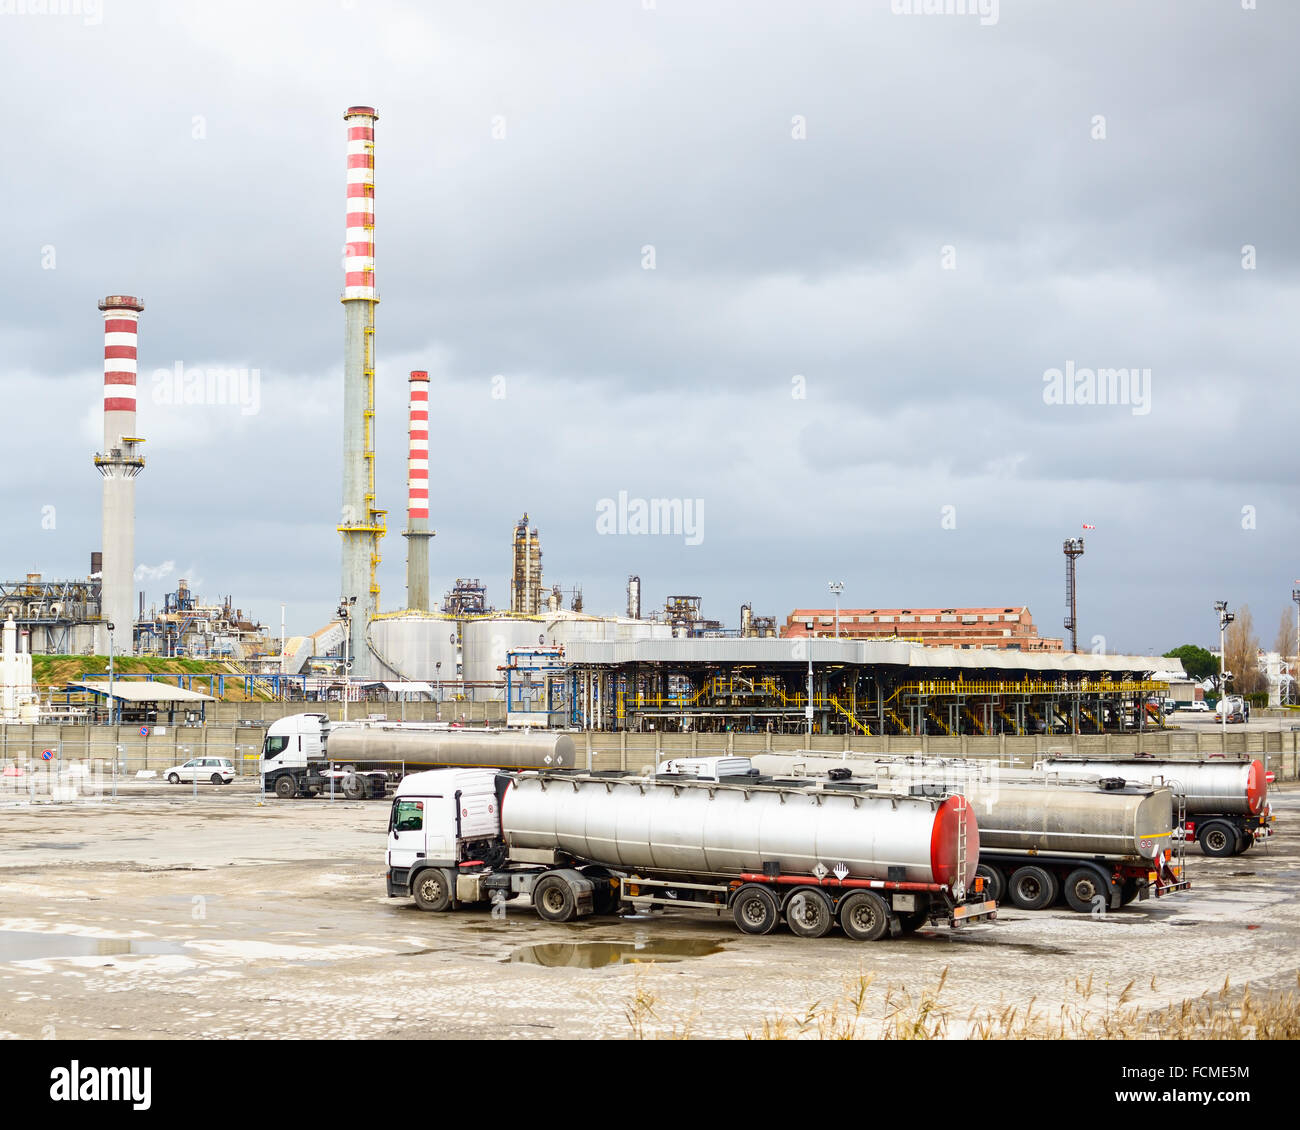 Oil refinery industry, smoke stacks and silver tanker lorry or truck in parking Stock Photo